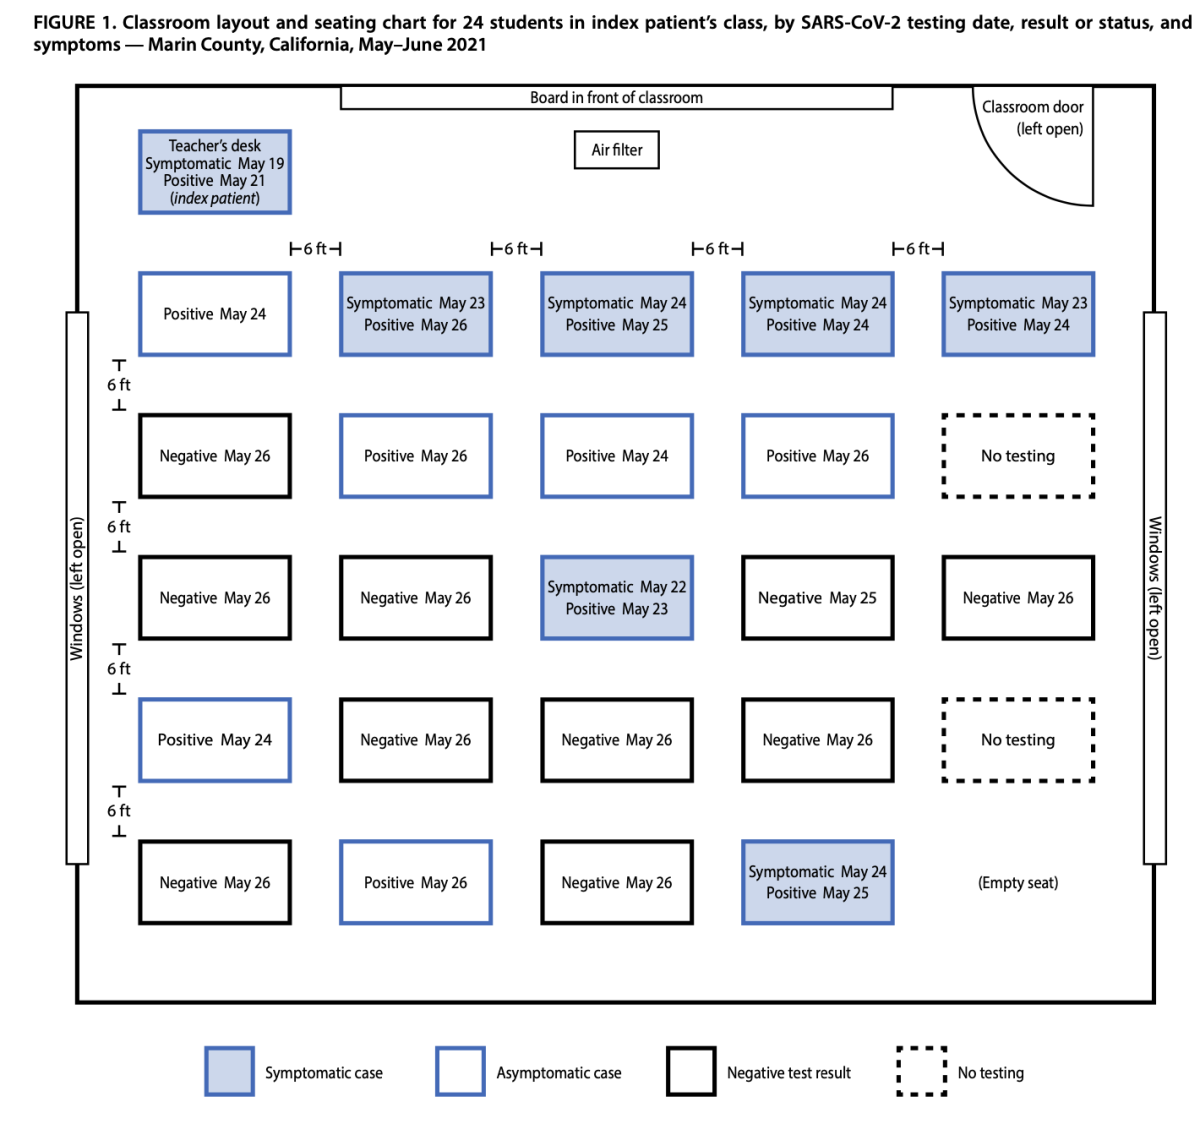 Classroom layout and seating chart for 24 students in index patient’s class